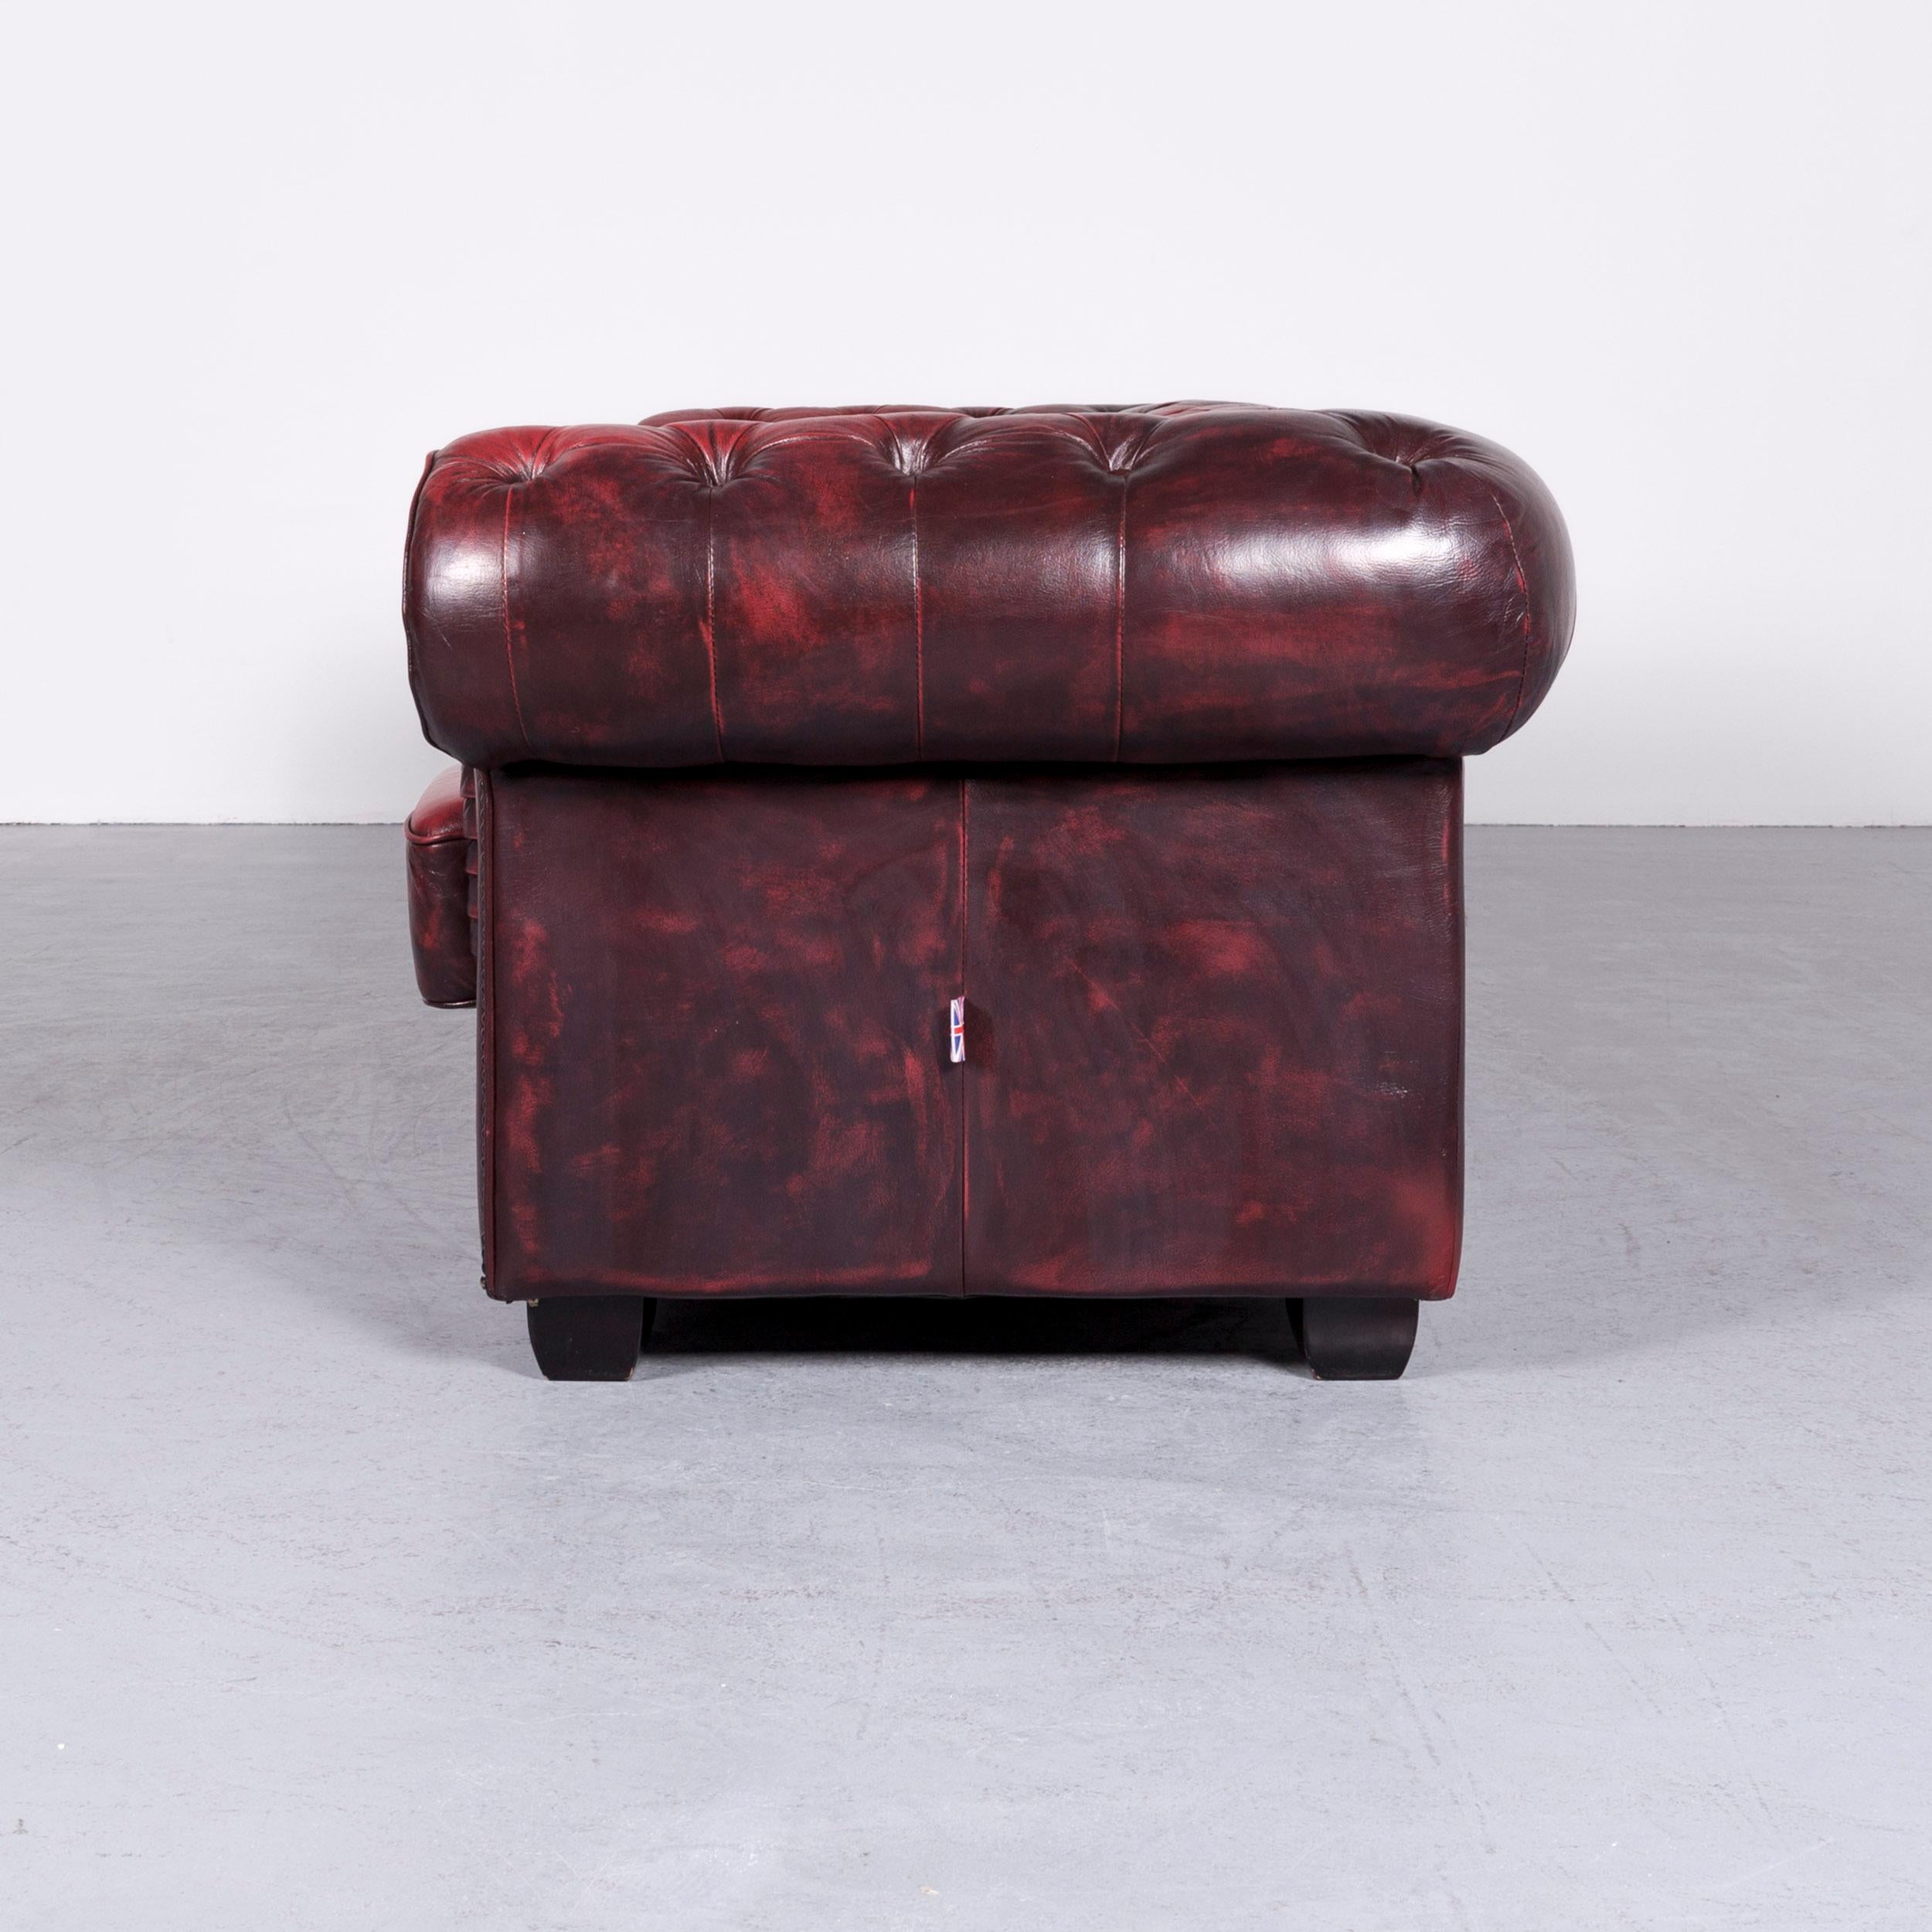 Chesterfield Leather Sofa Red Three-Seat Vintage Couch 3